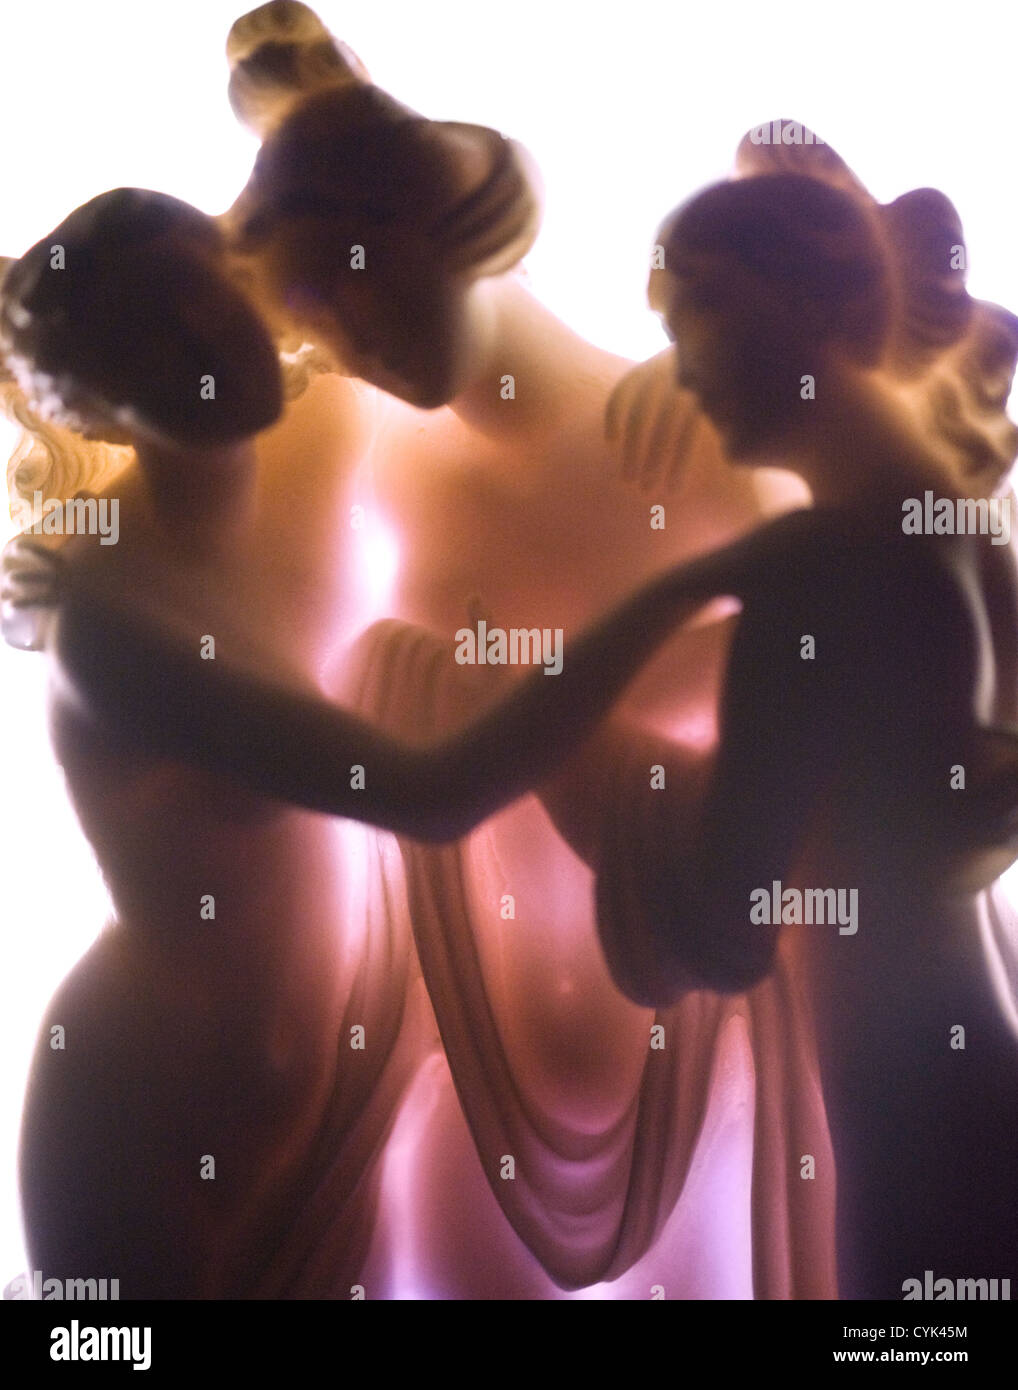 The Three Graces, young women, a porcelain figurine photographed with intense light behind Stock Photo